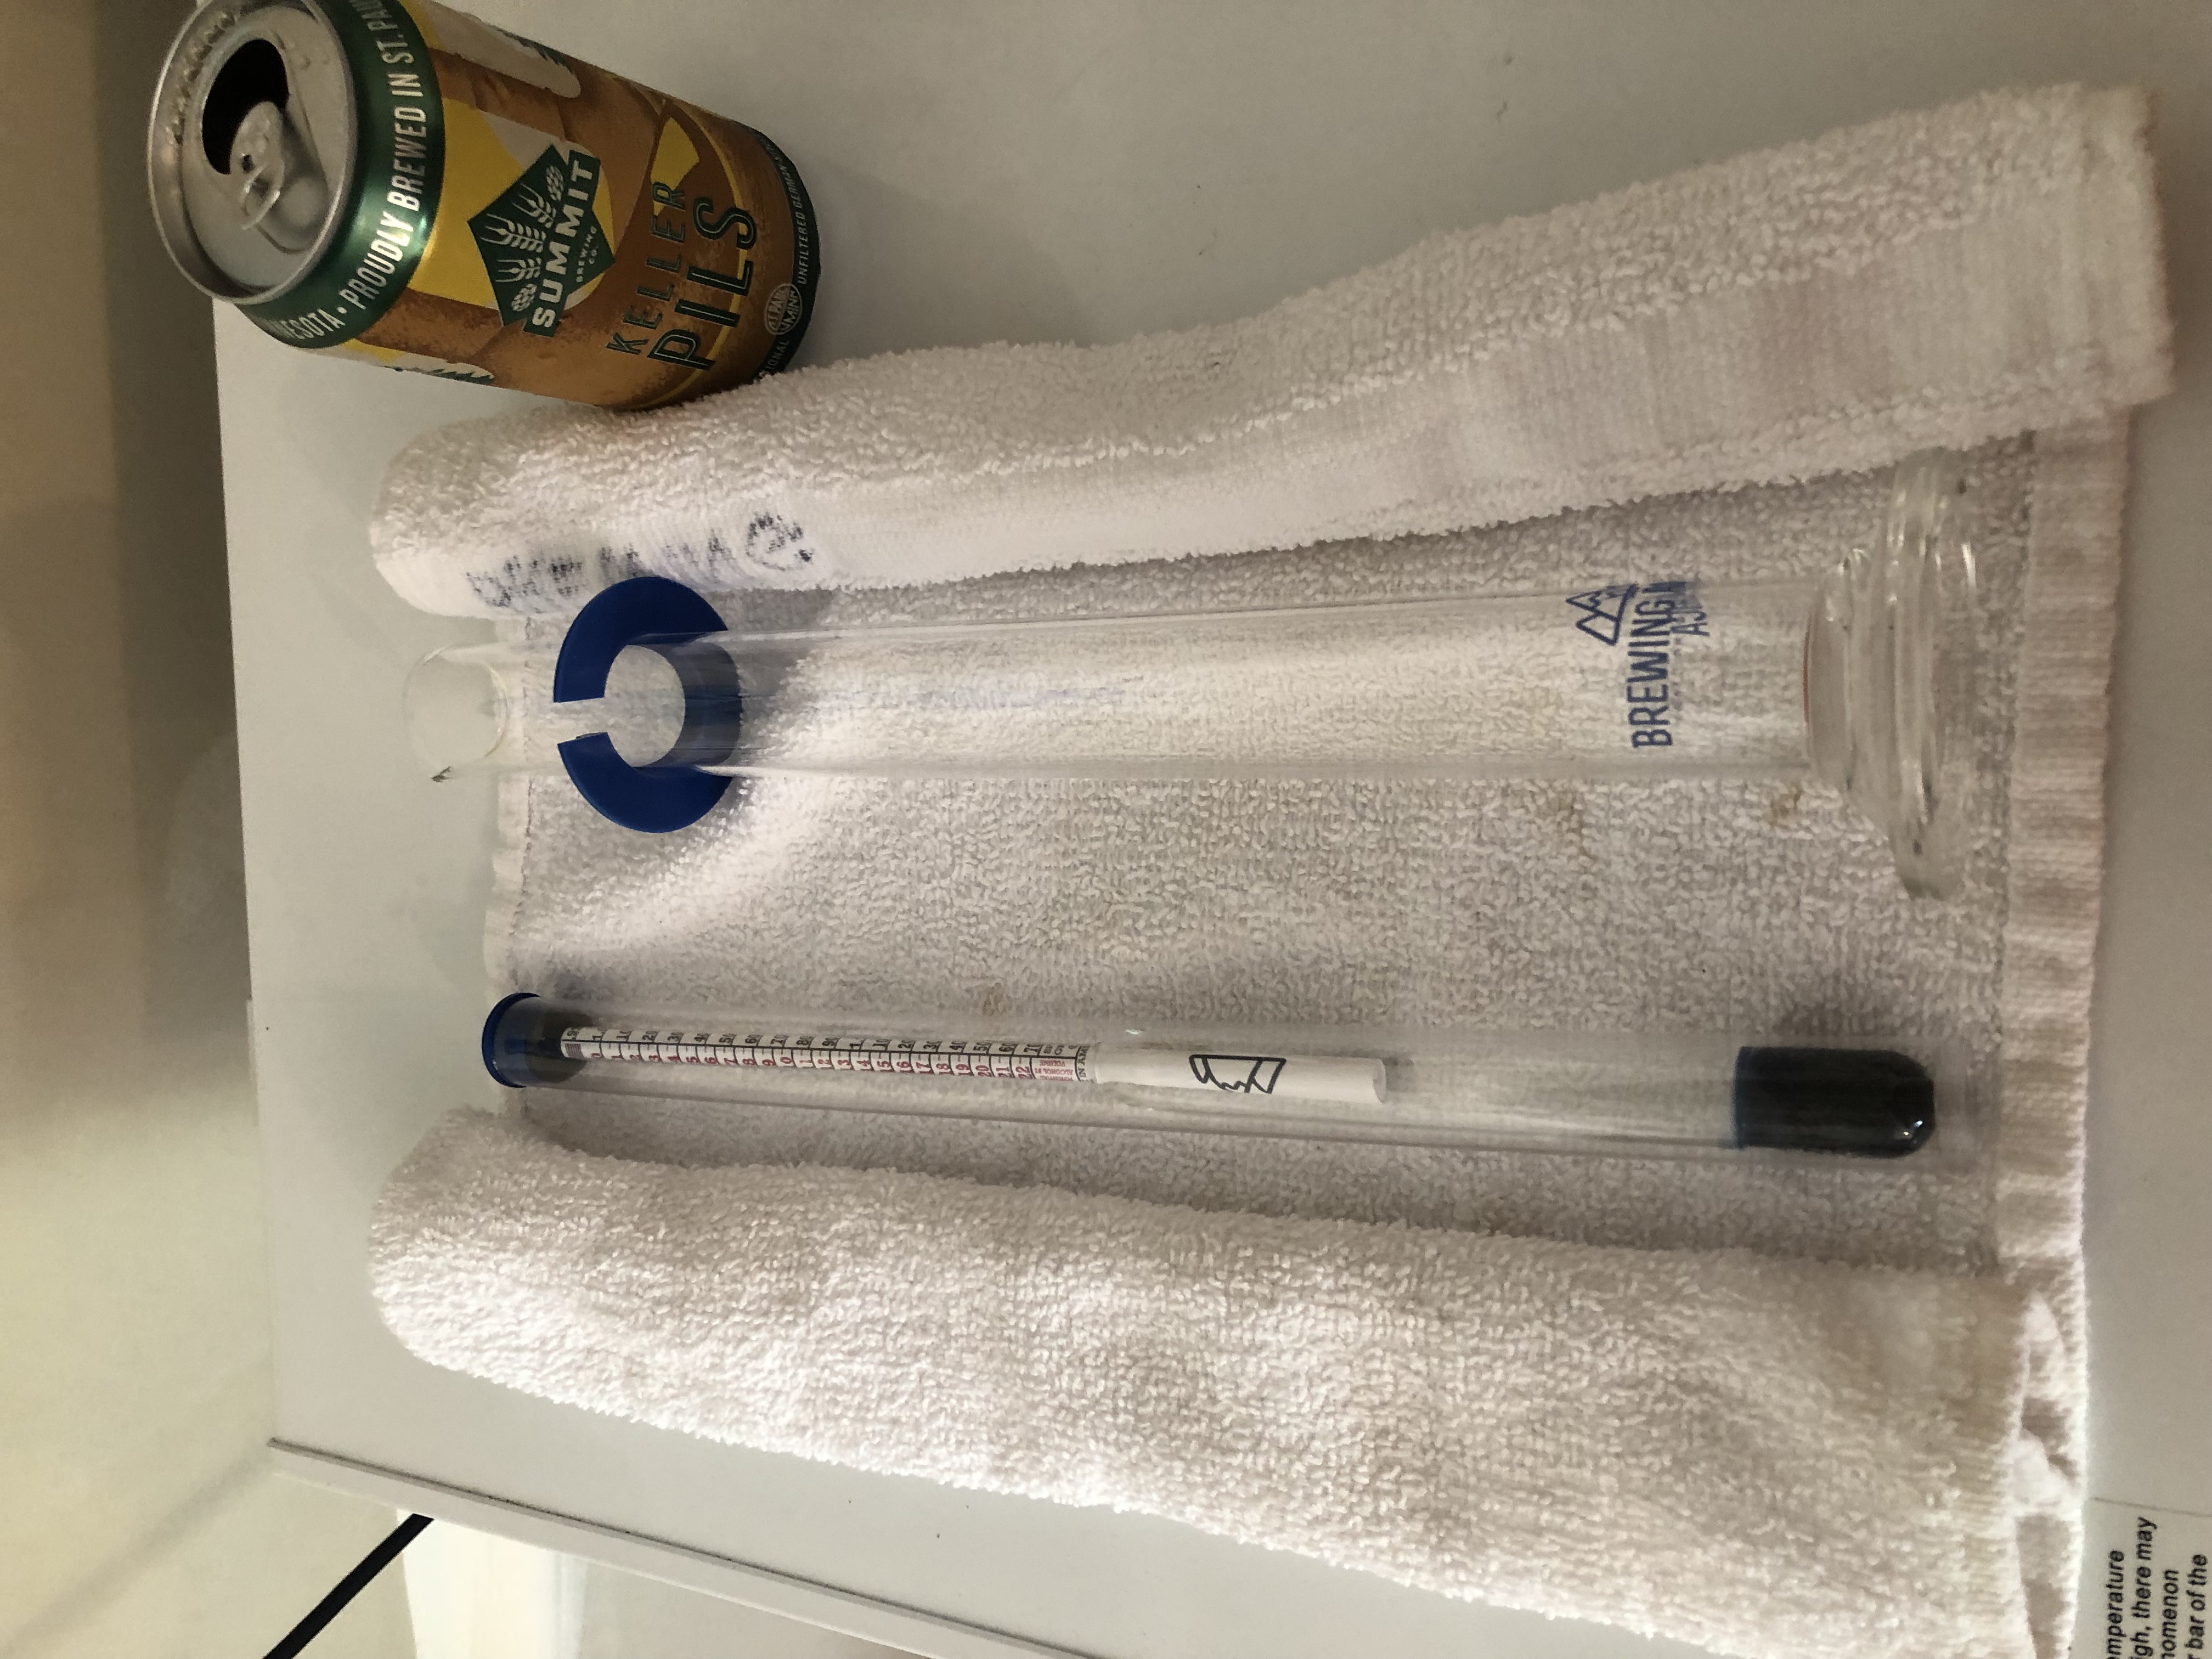 Hydrometer and smaple tube on a towel